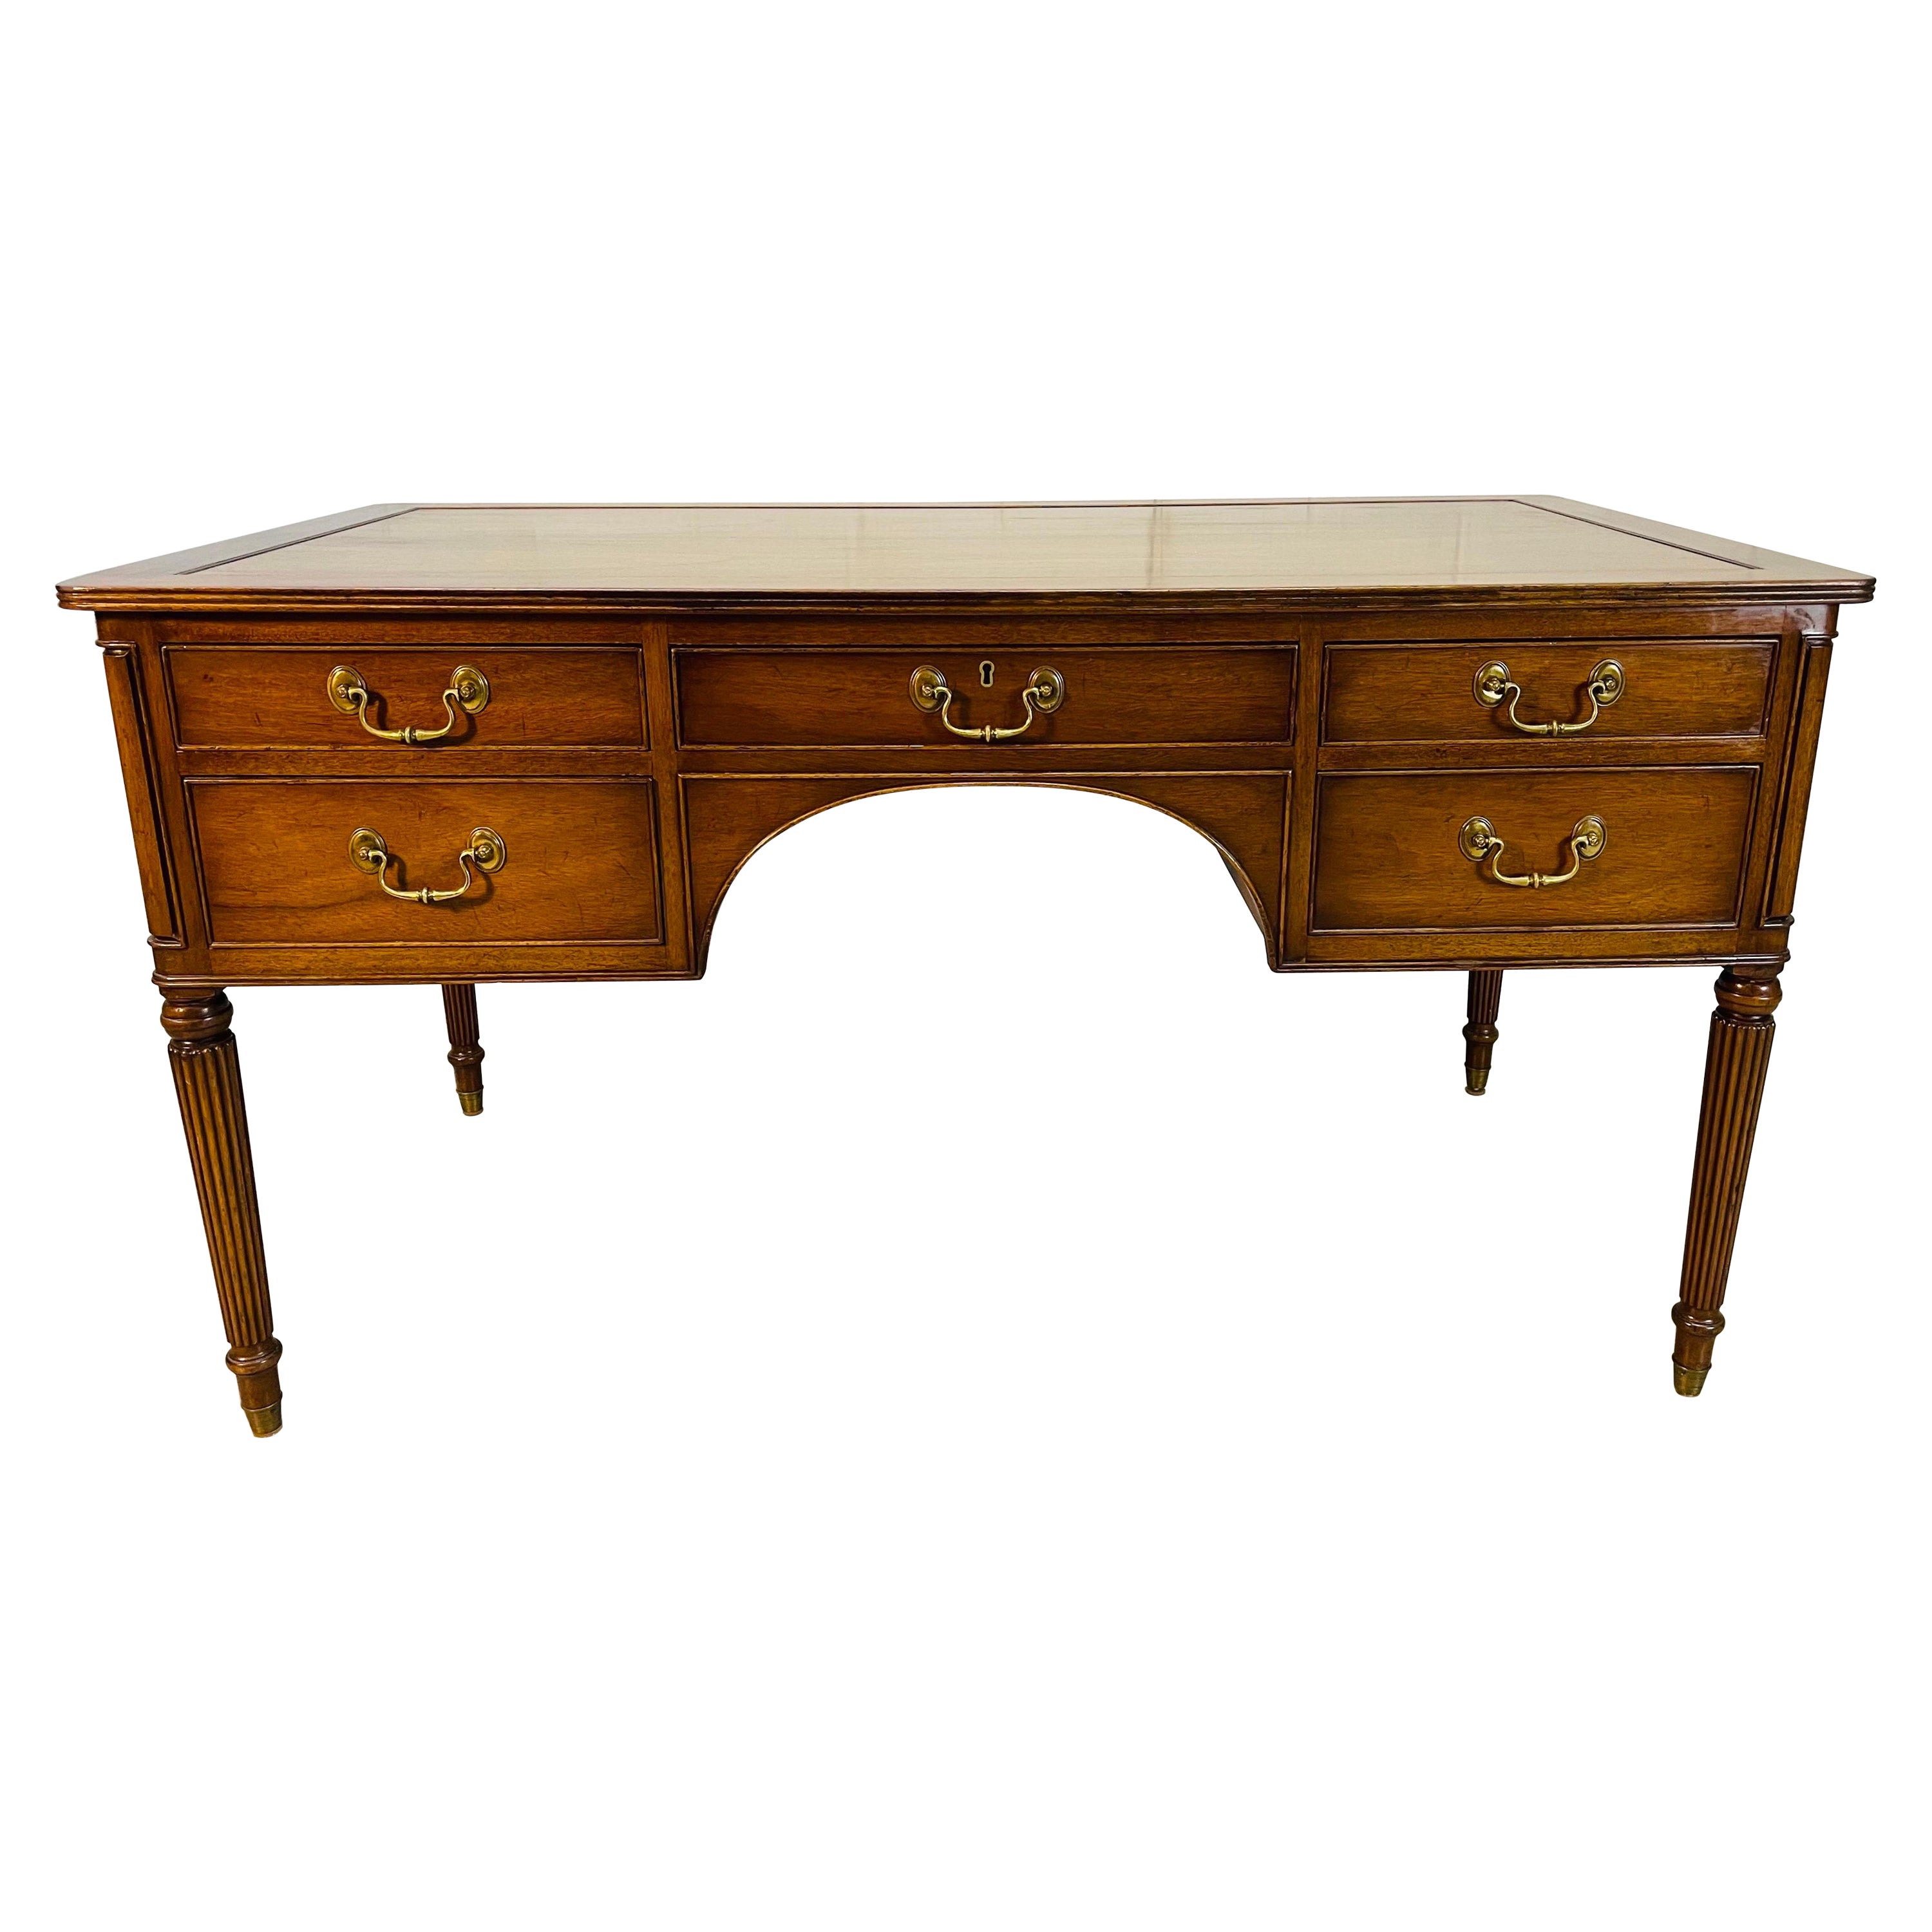 English Neoclassical Sheraton Style Mahogany Desk by Kittinger For Sale